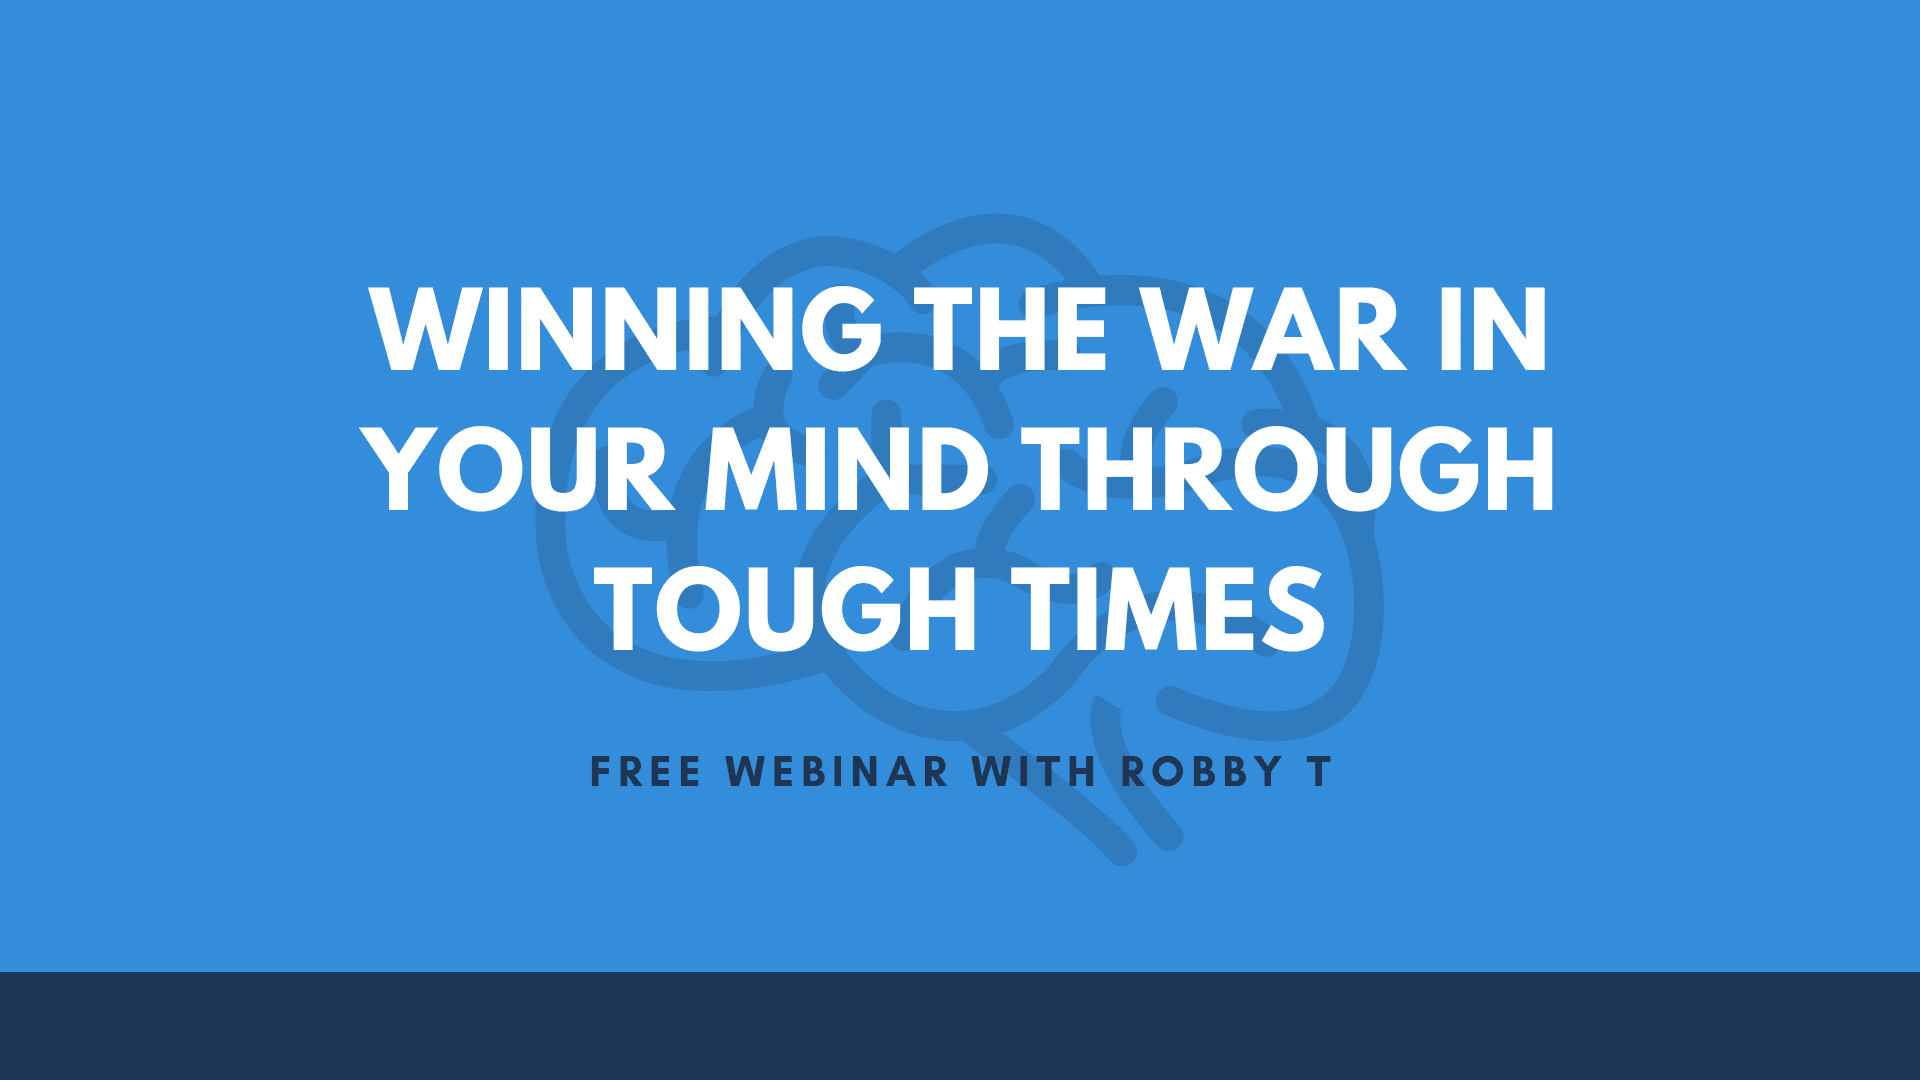 Winning The War In Your Mind During Tough Times